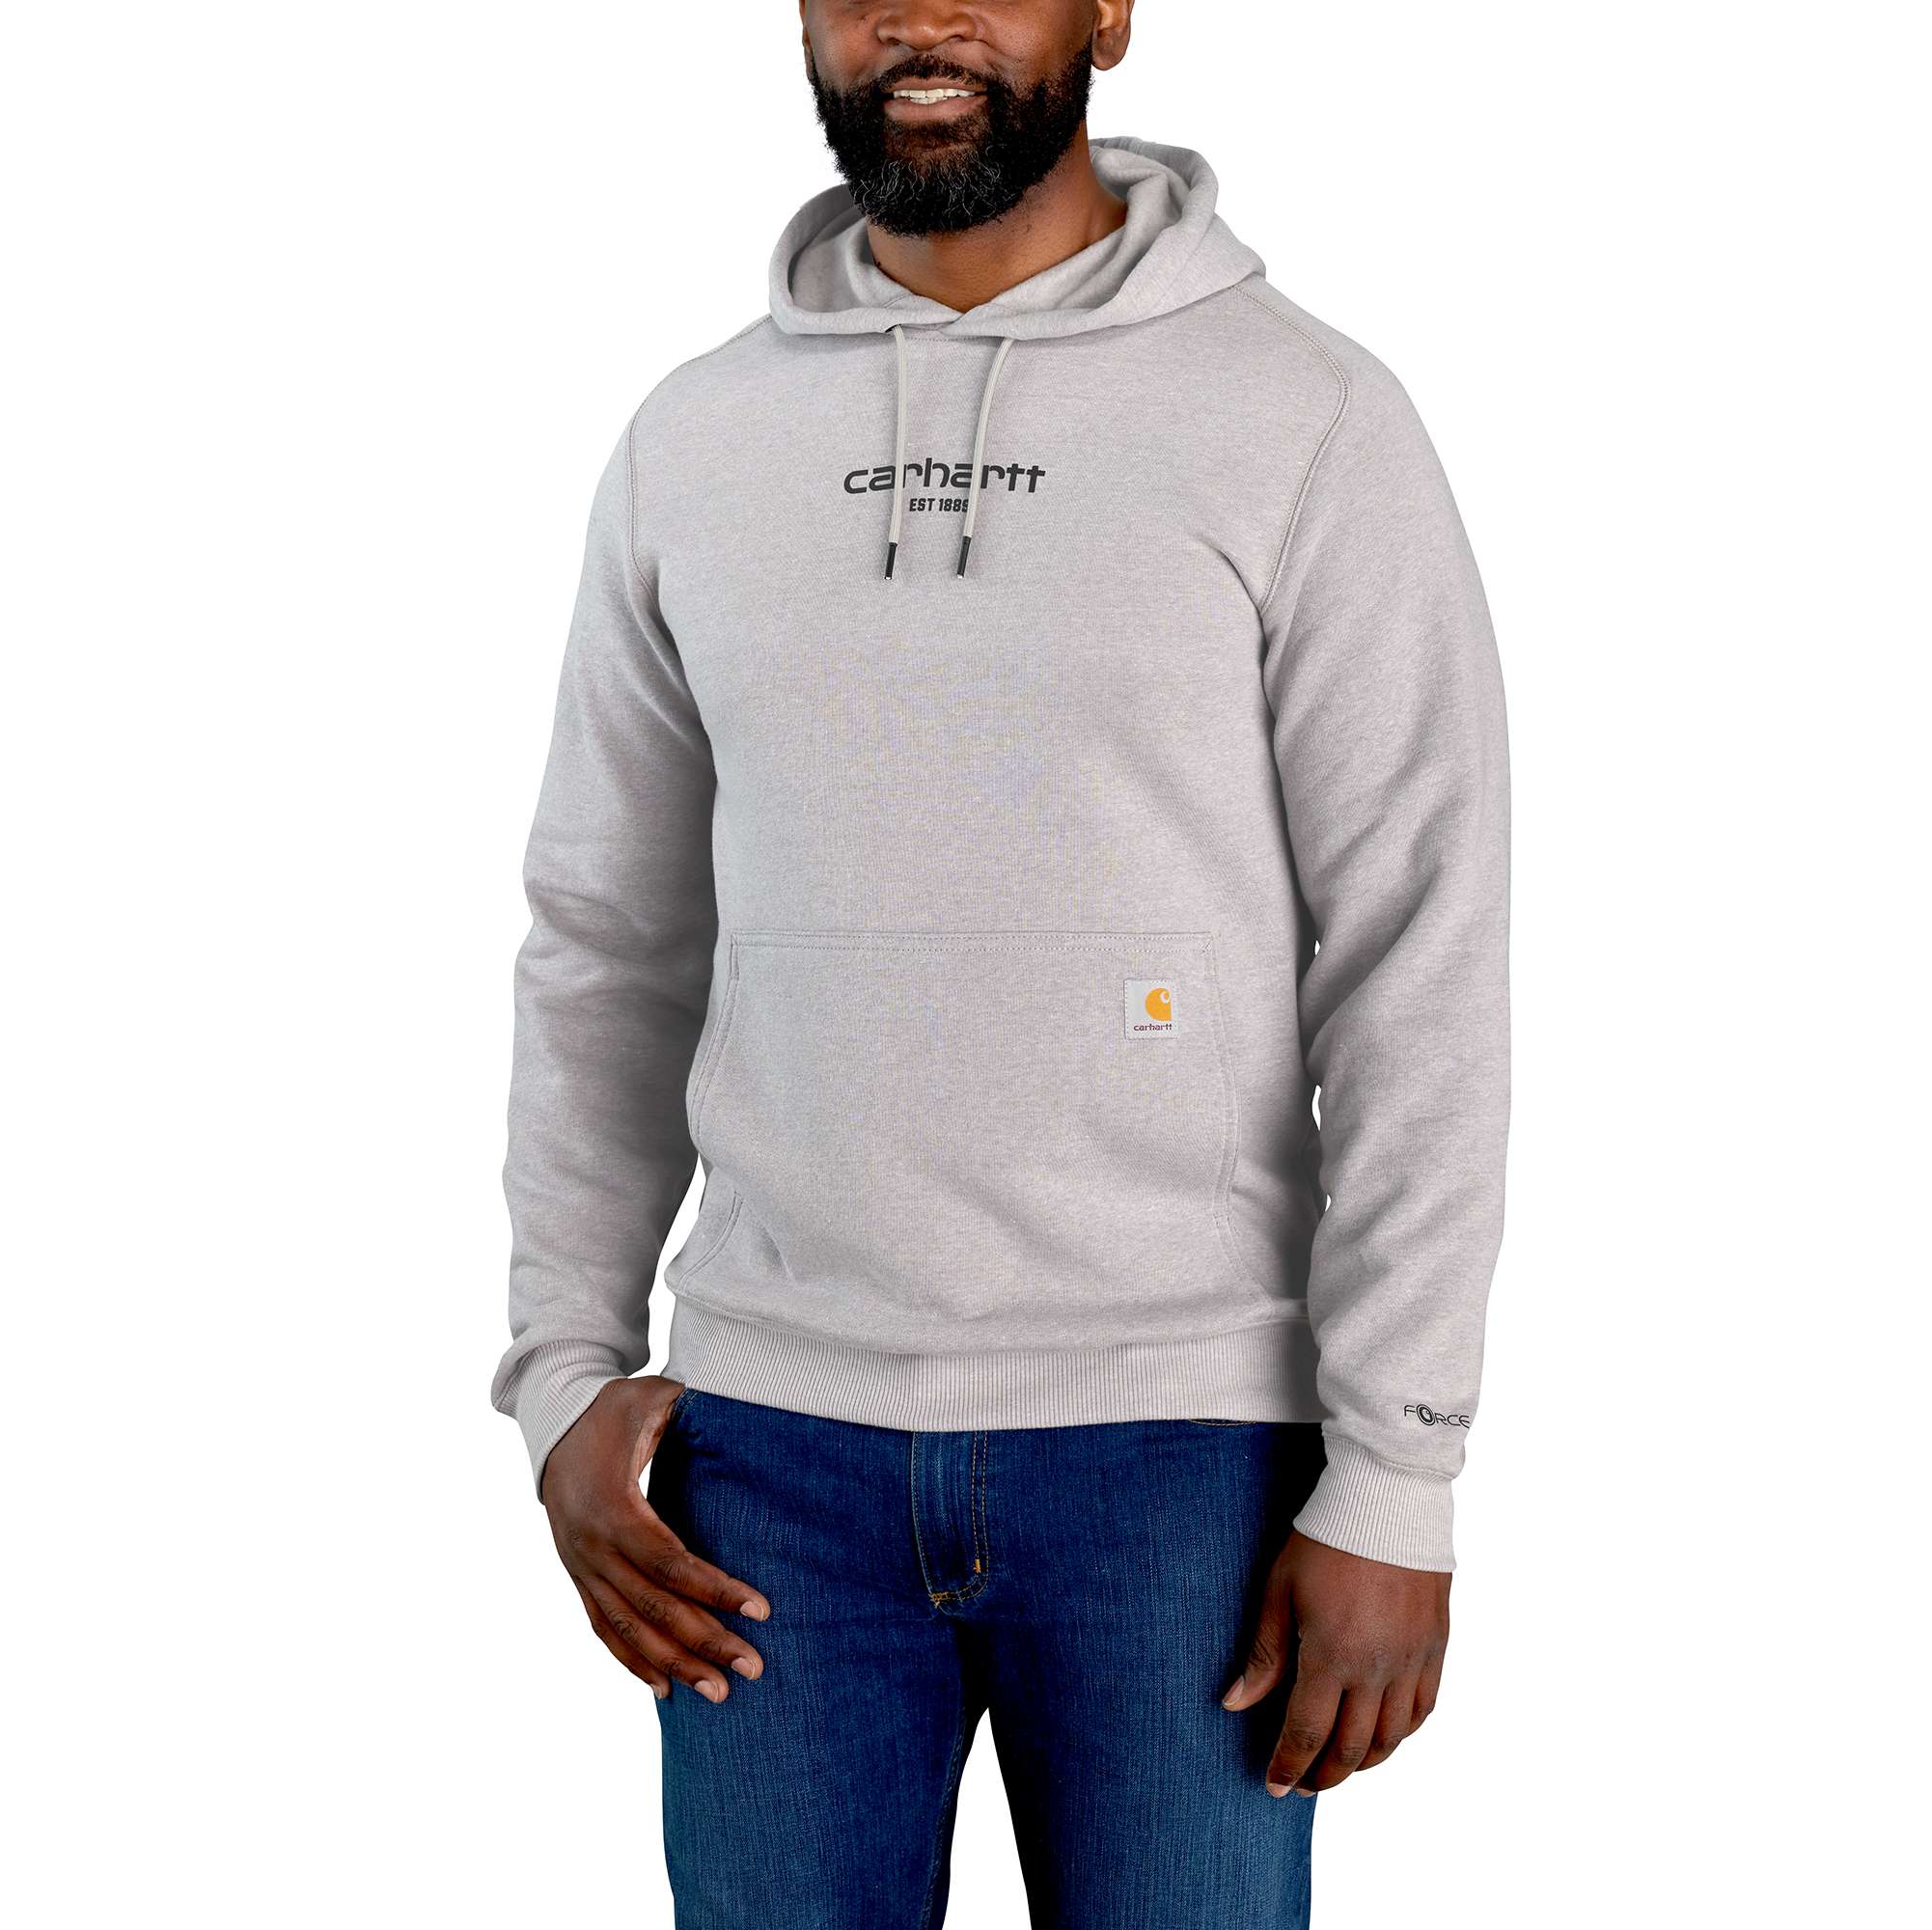 Carhartt Men's Force Relaxed Fit Lightweight Logo Graphic Hoodie (4 Colors) $30 + Free Shipping